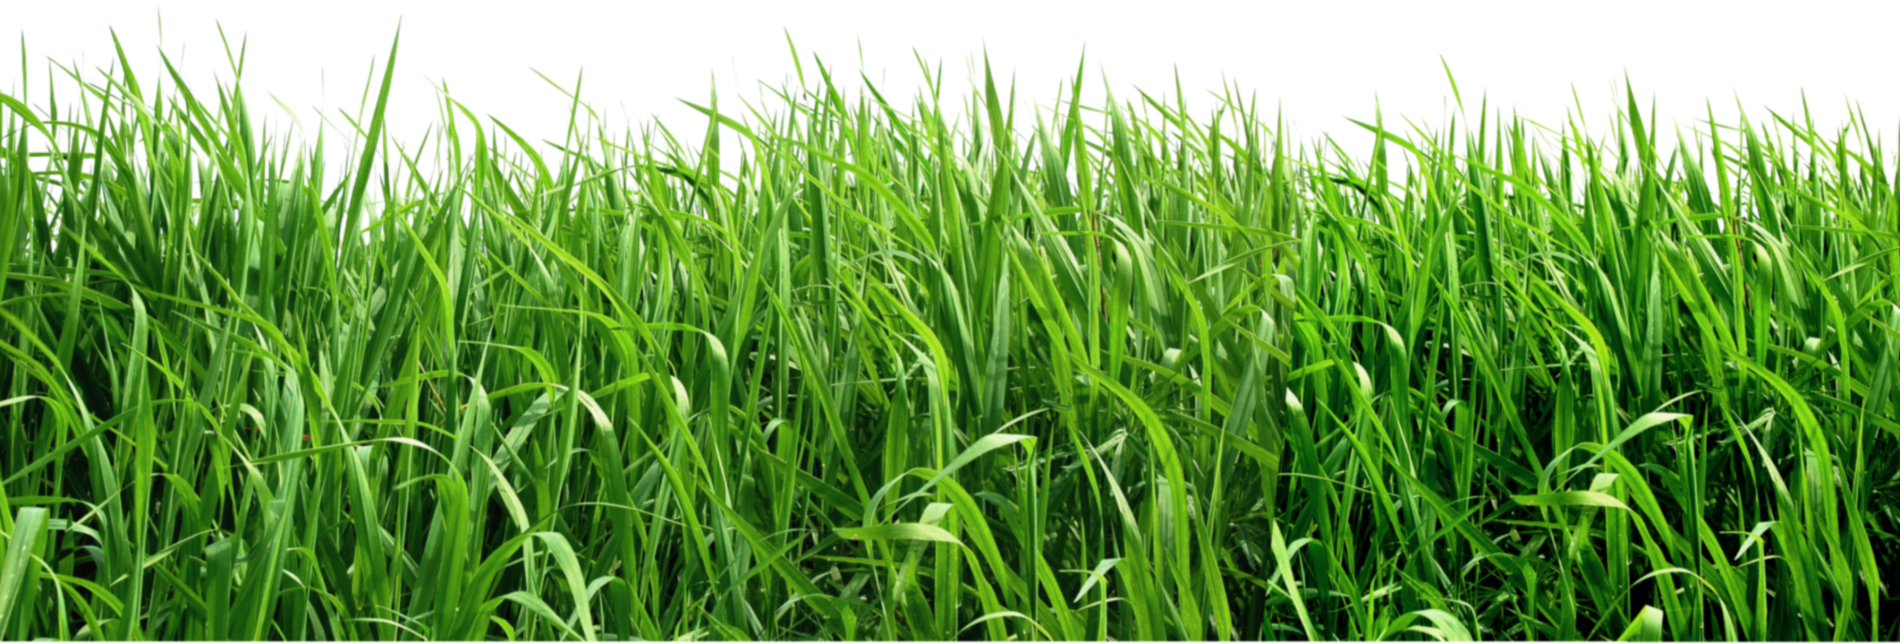 Clipart grass printable. Png picture magnets or